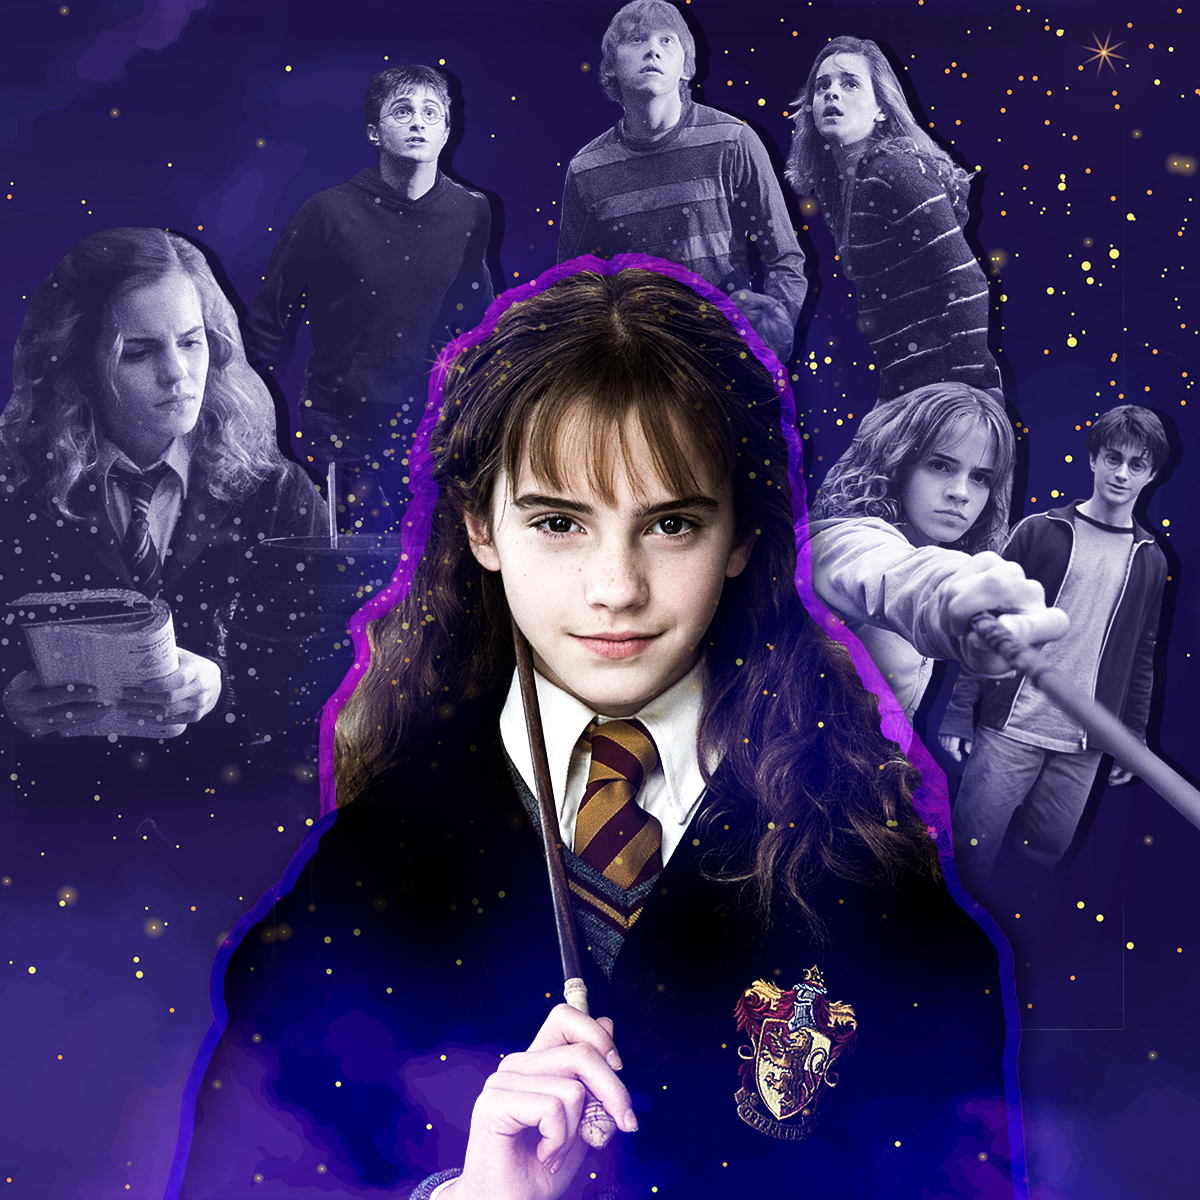 hermione granger through the years